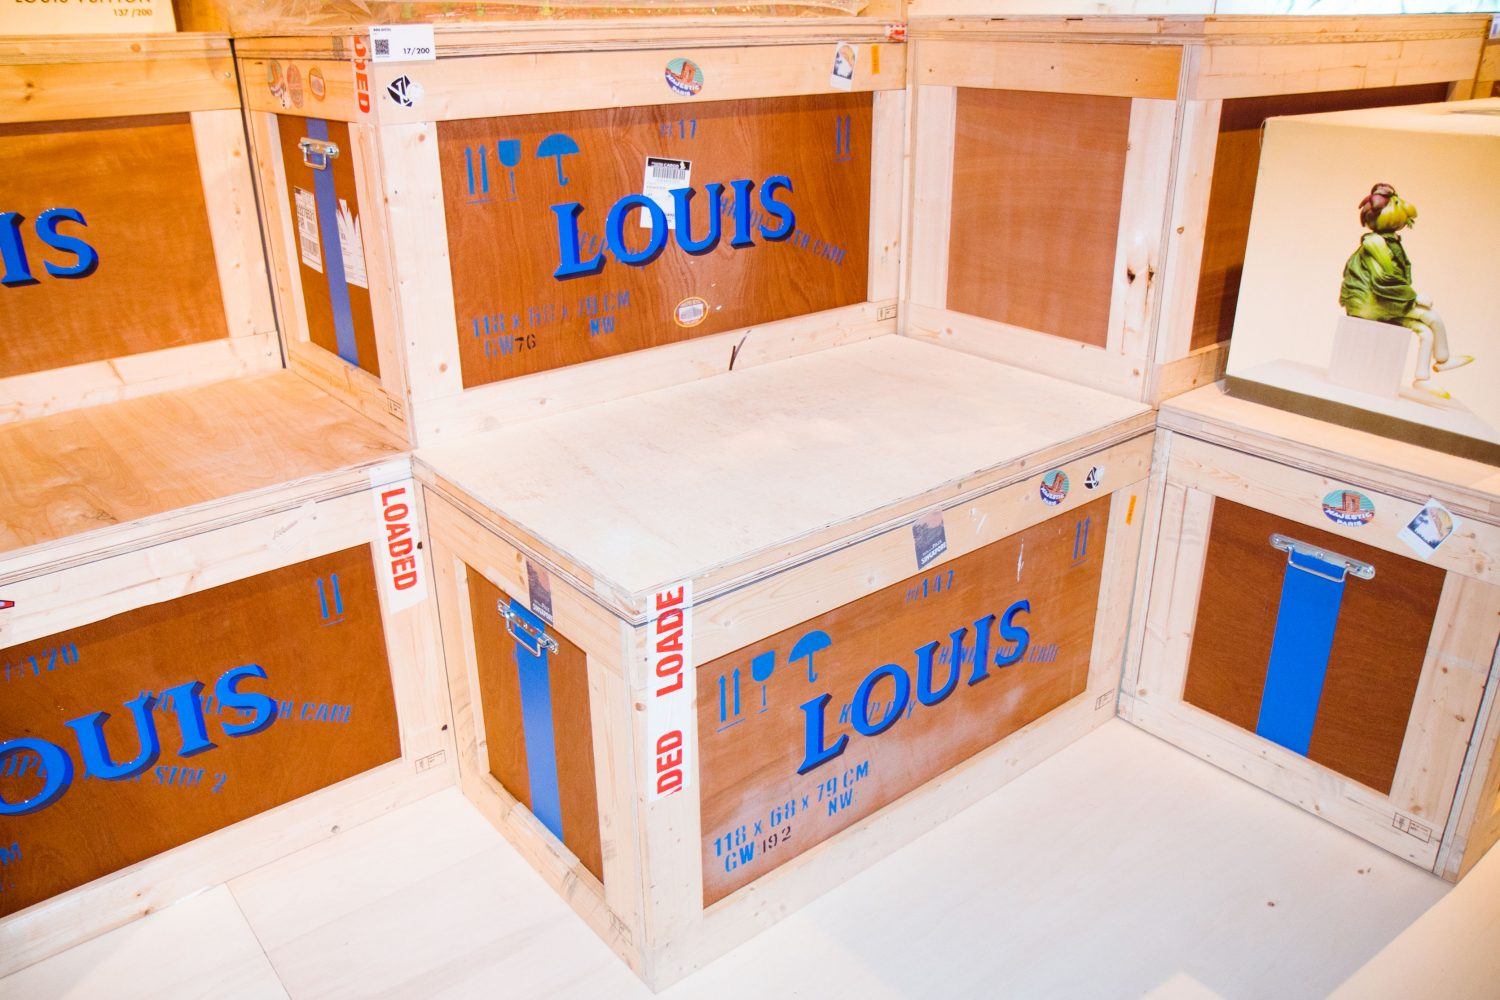 Louis Vuitton  200 Trunks, 200 Visionaries Exhibition Thrills at New York  City Launch - Reserved Magazine